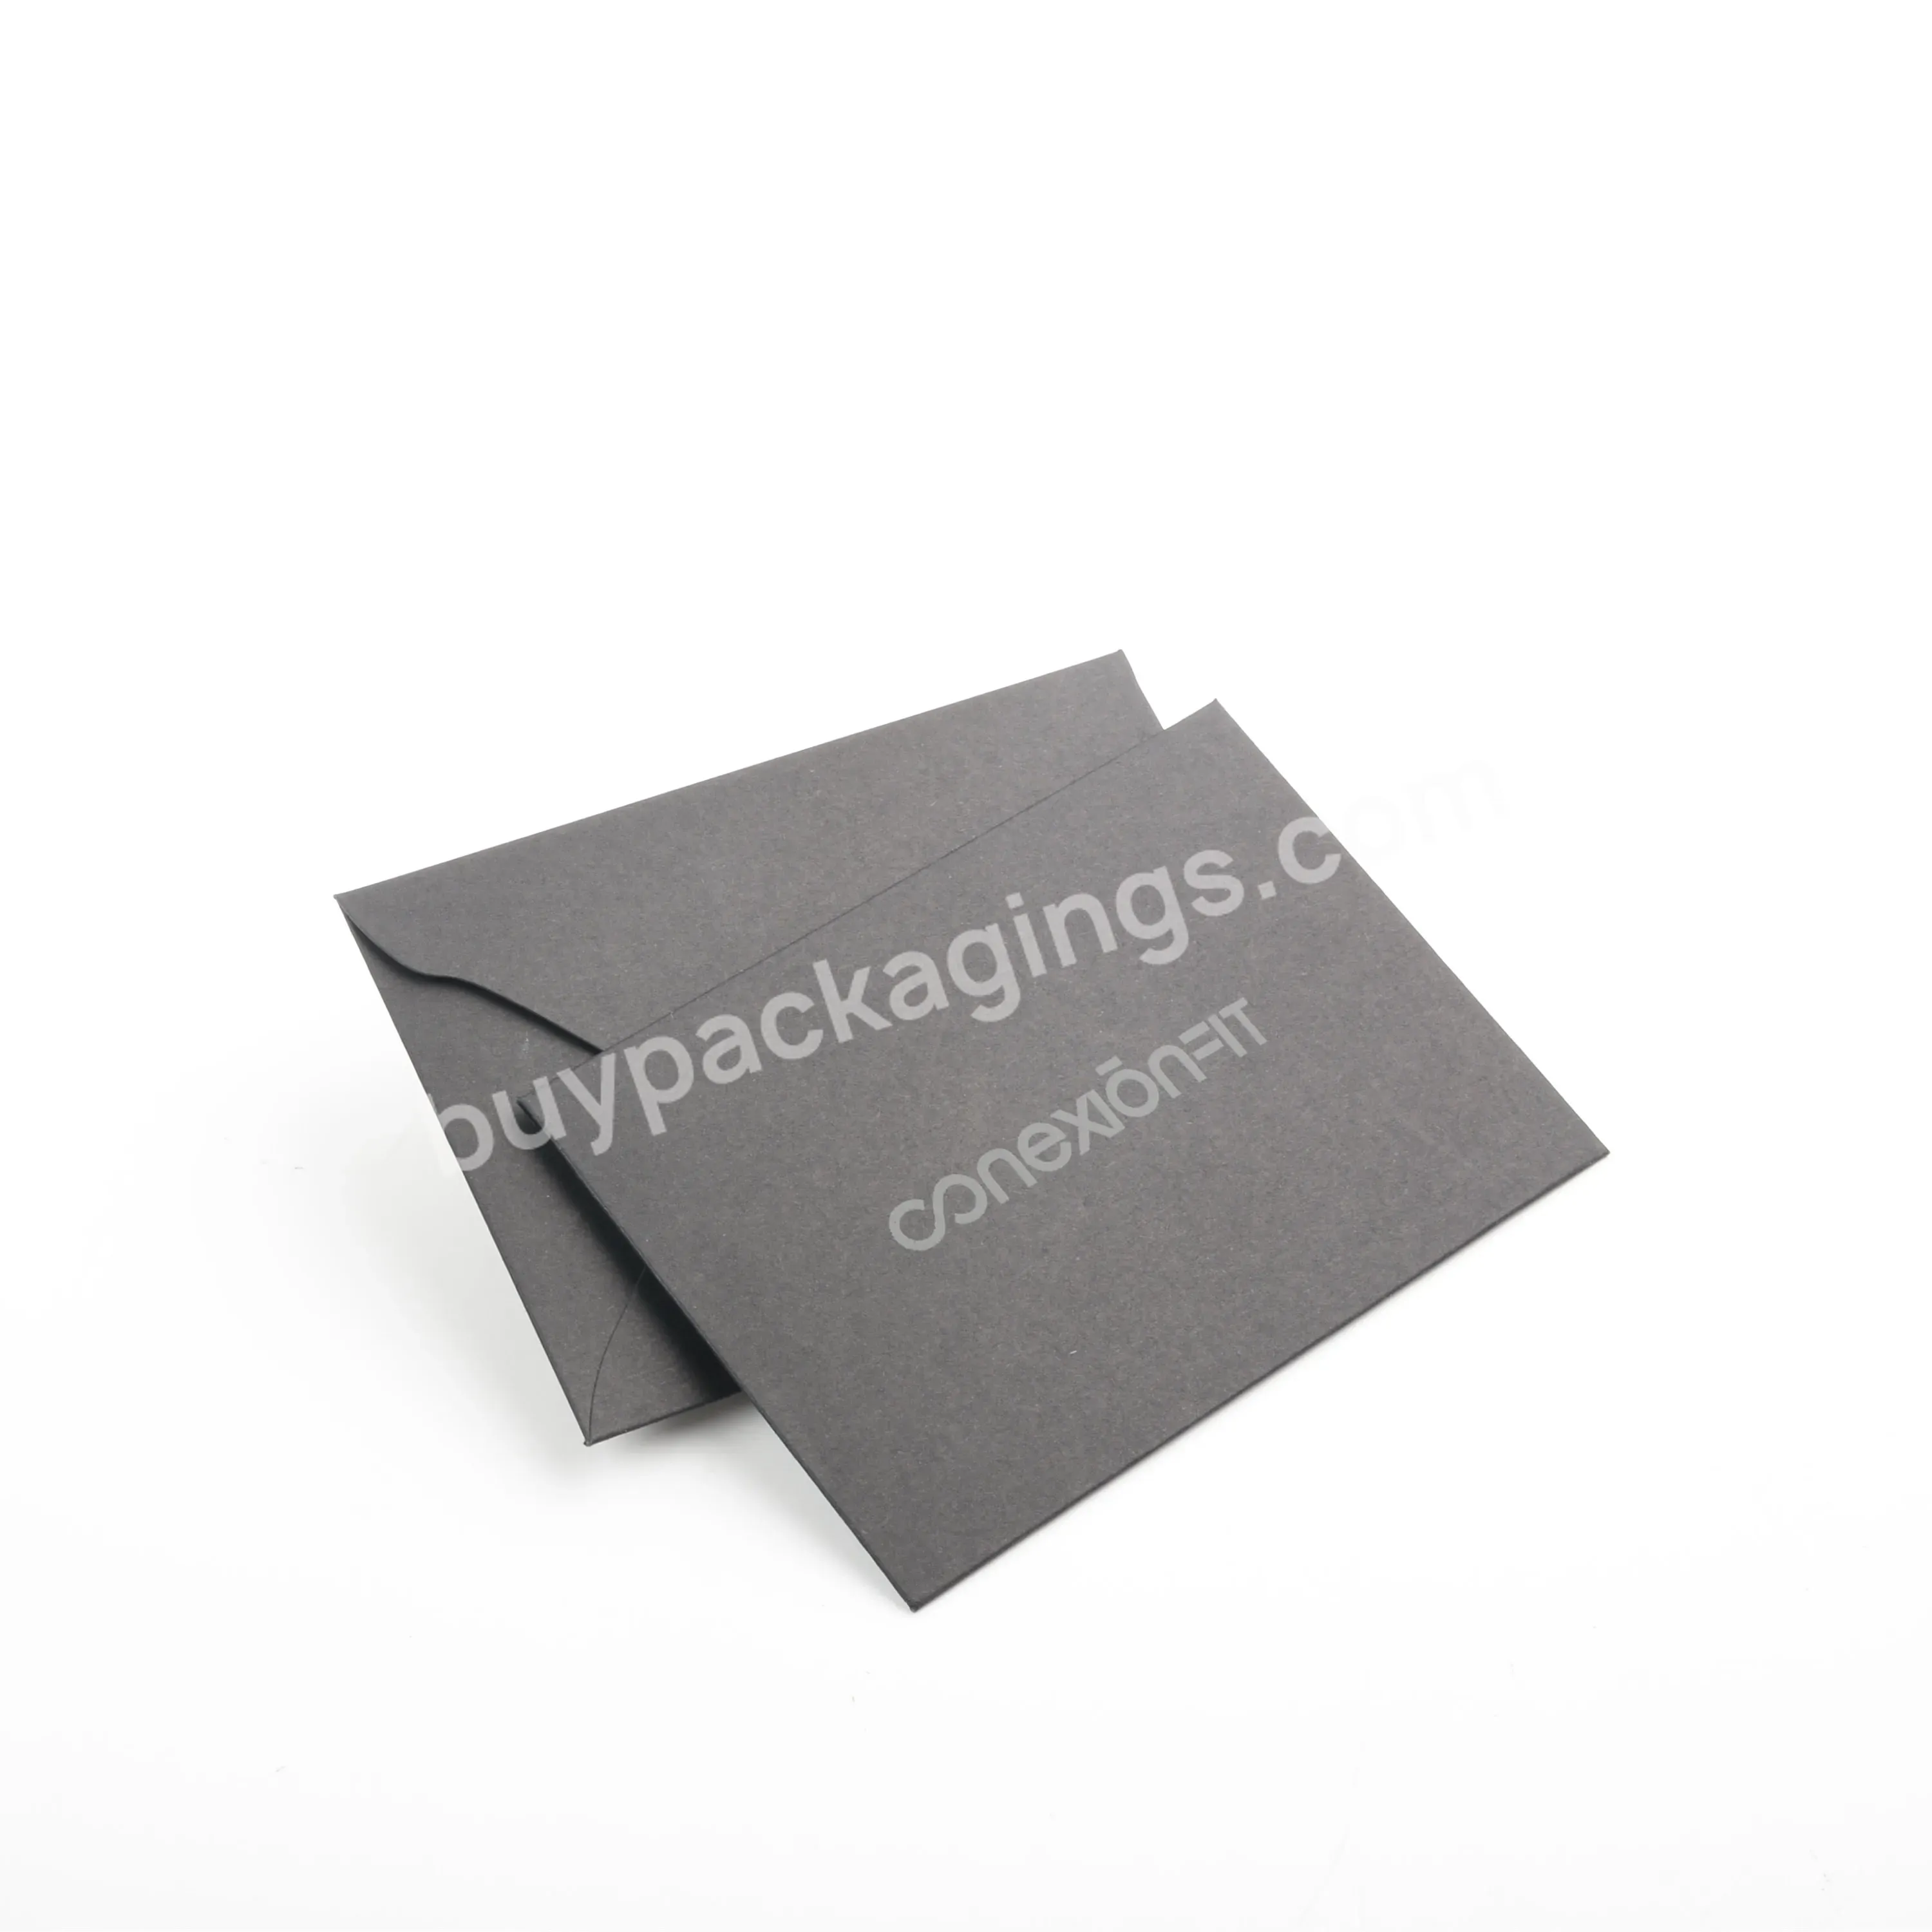 Custom Envelopes And Cards Of Any Size Printed In Black With High Quality